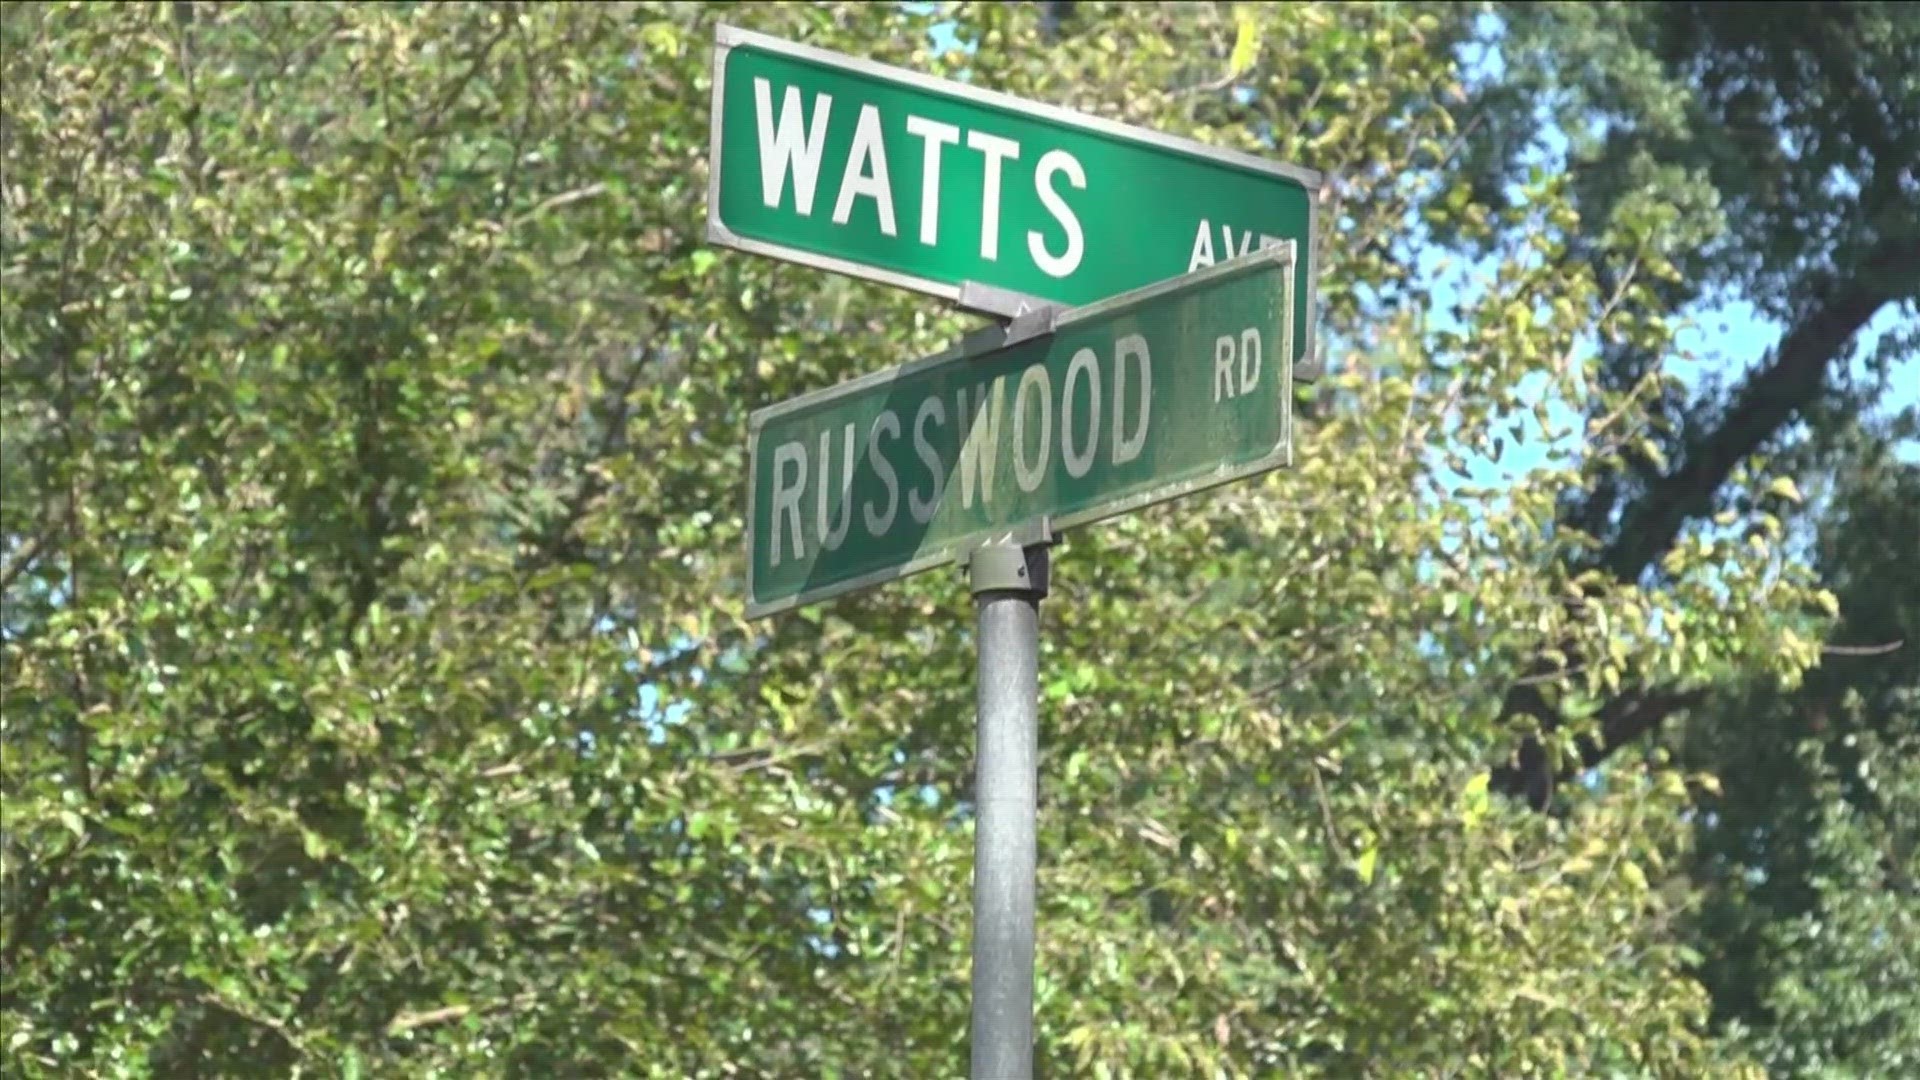 Watts Avenue, between Wells Station Road and Russwood Road, is sometimes lined with as many as six stray dogs at once, and mail carriers said they are tired of it.